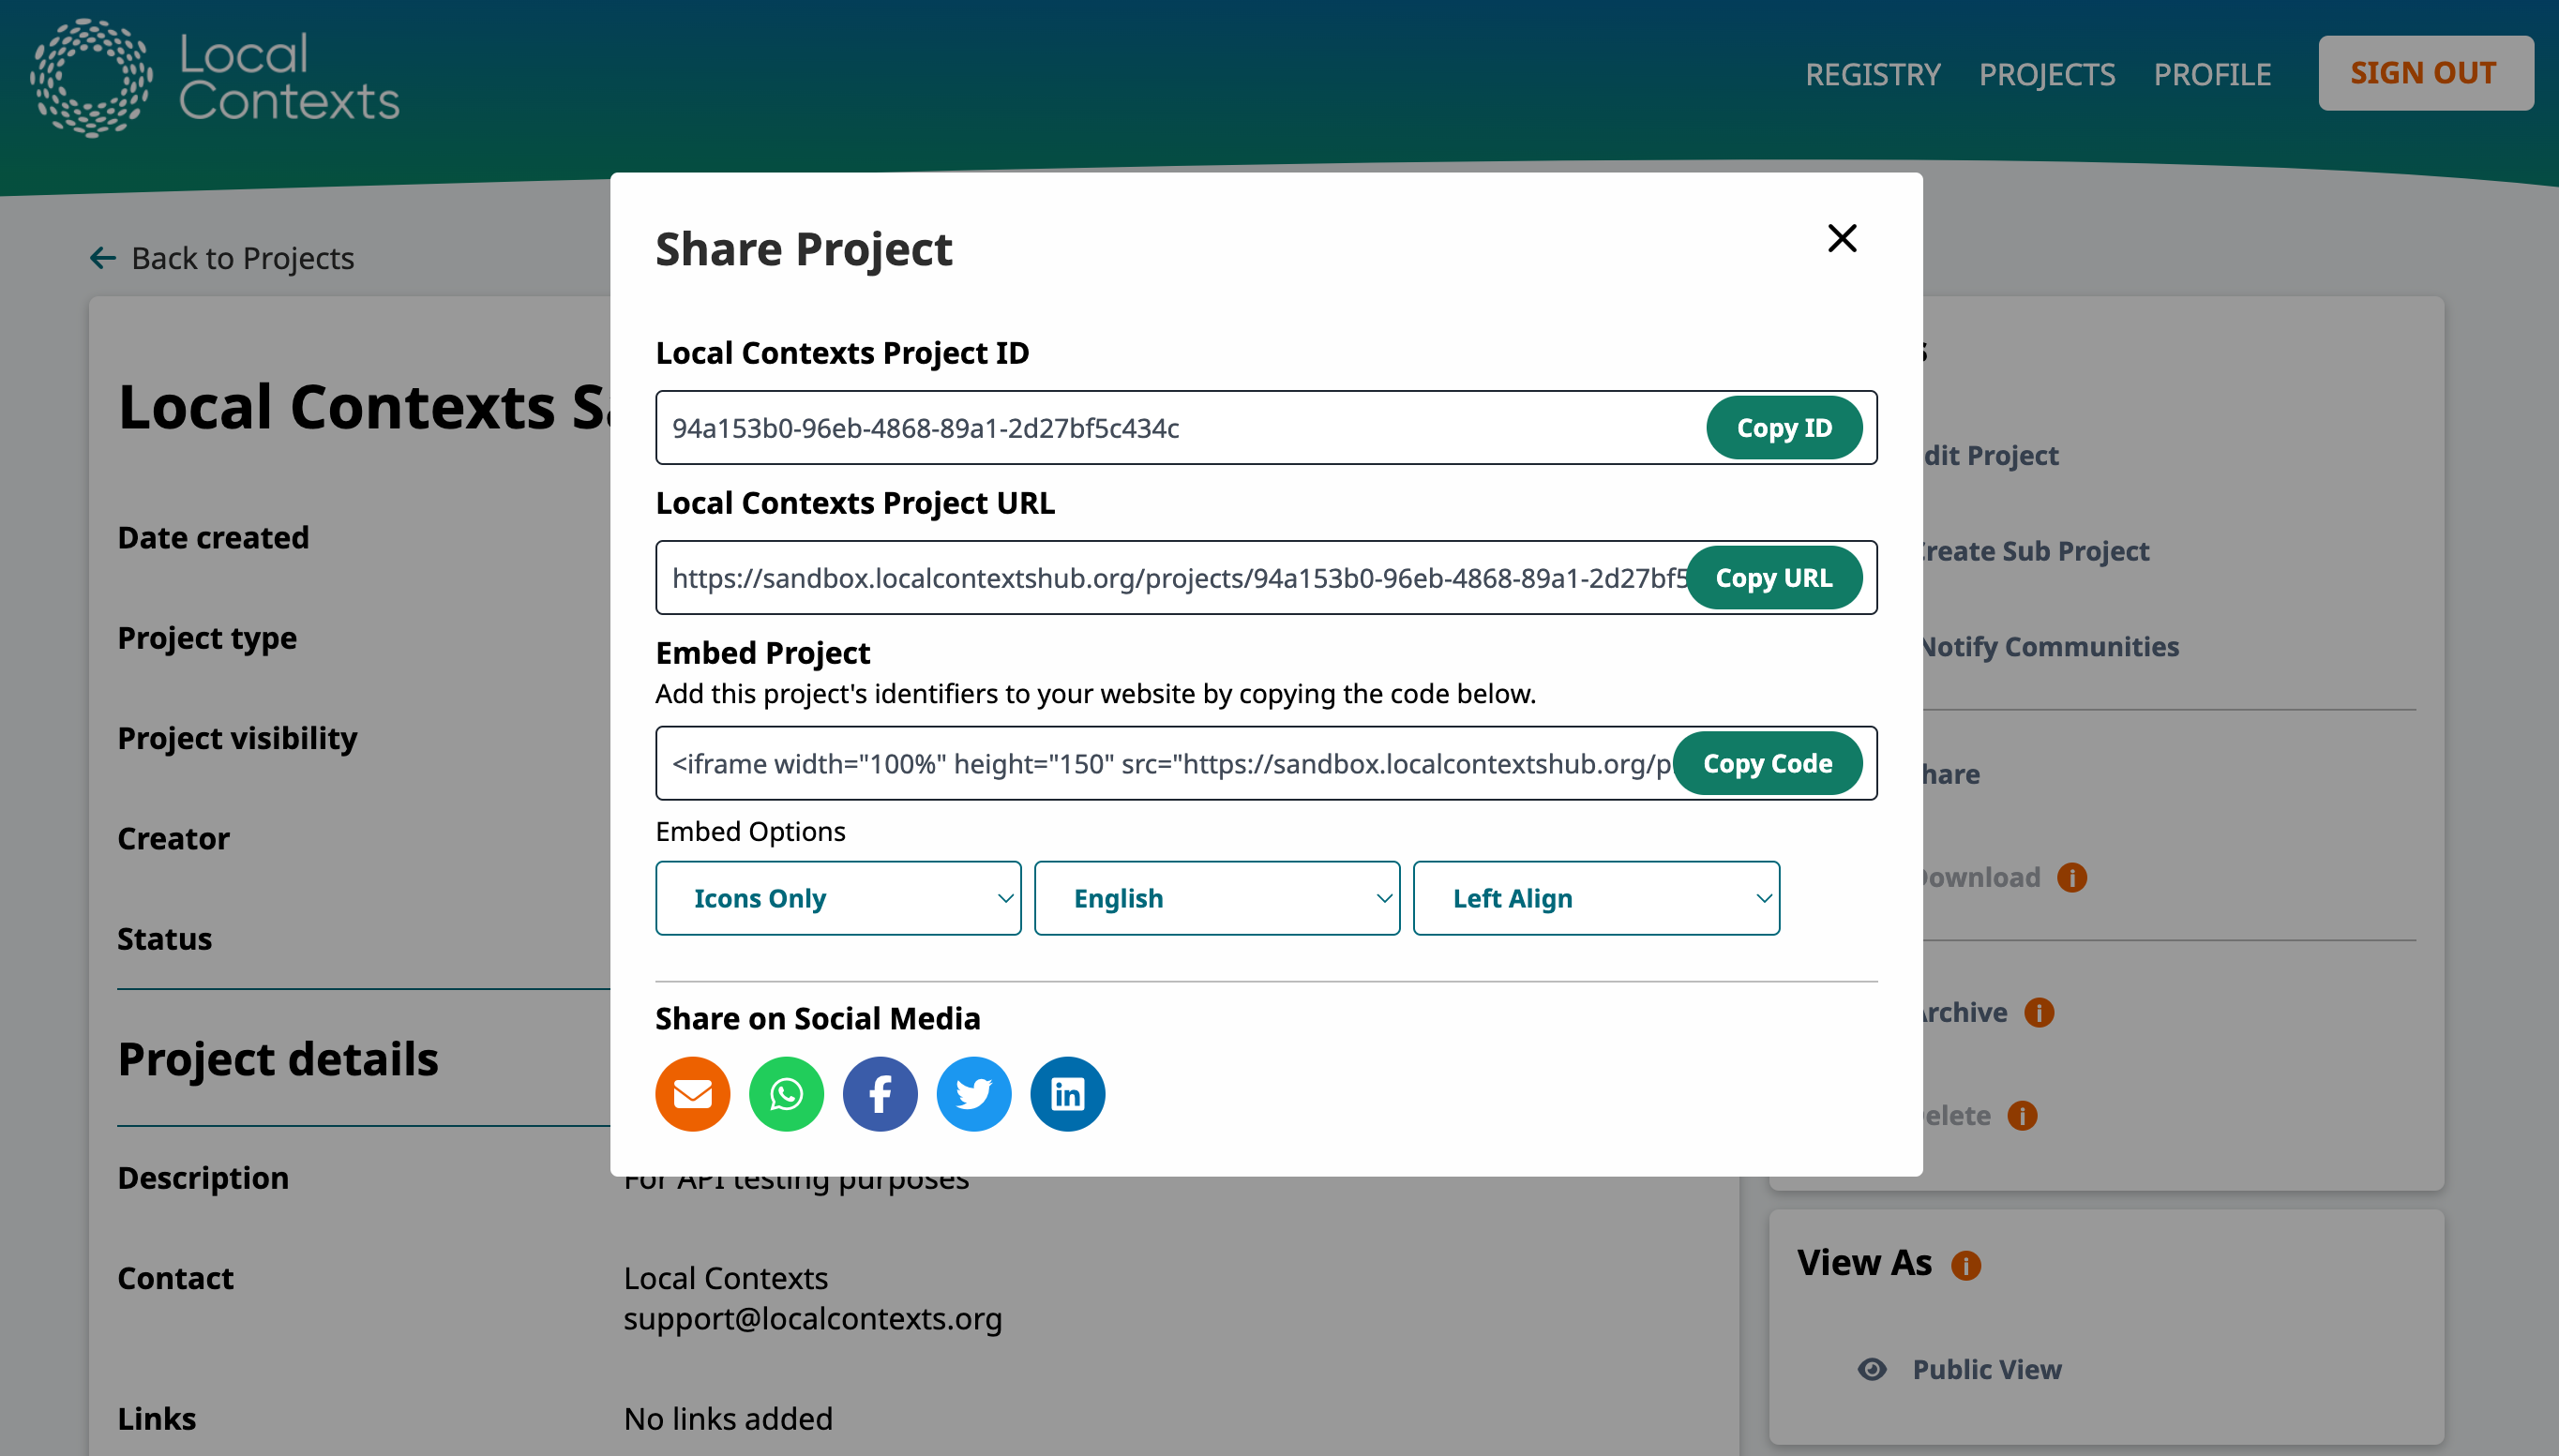 Screenshot of the “Share Project” modal showing options to copy the Local Contexts Project ID, Local Contexts Project URL, or embed code. Dropdown fields display embed options showing icons only, English, left align.